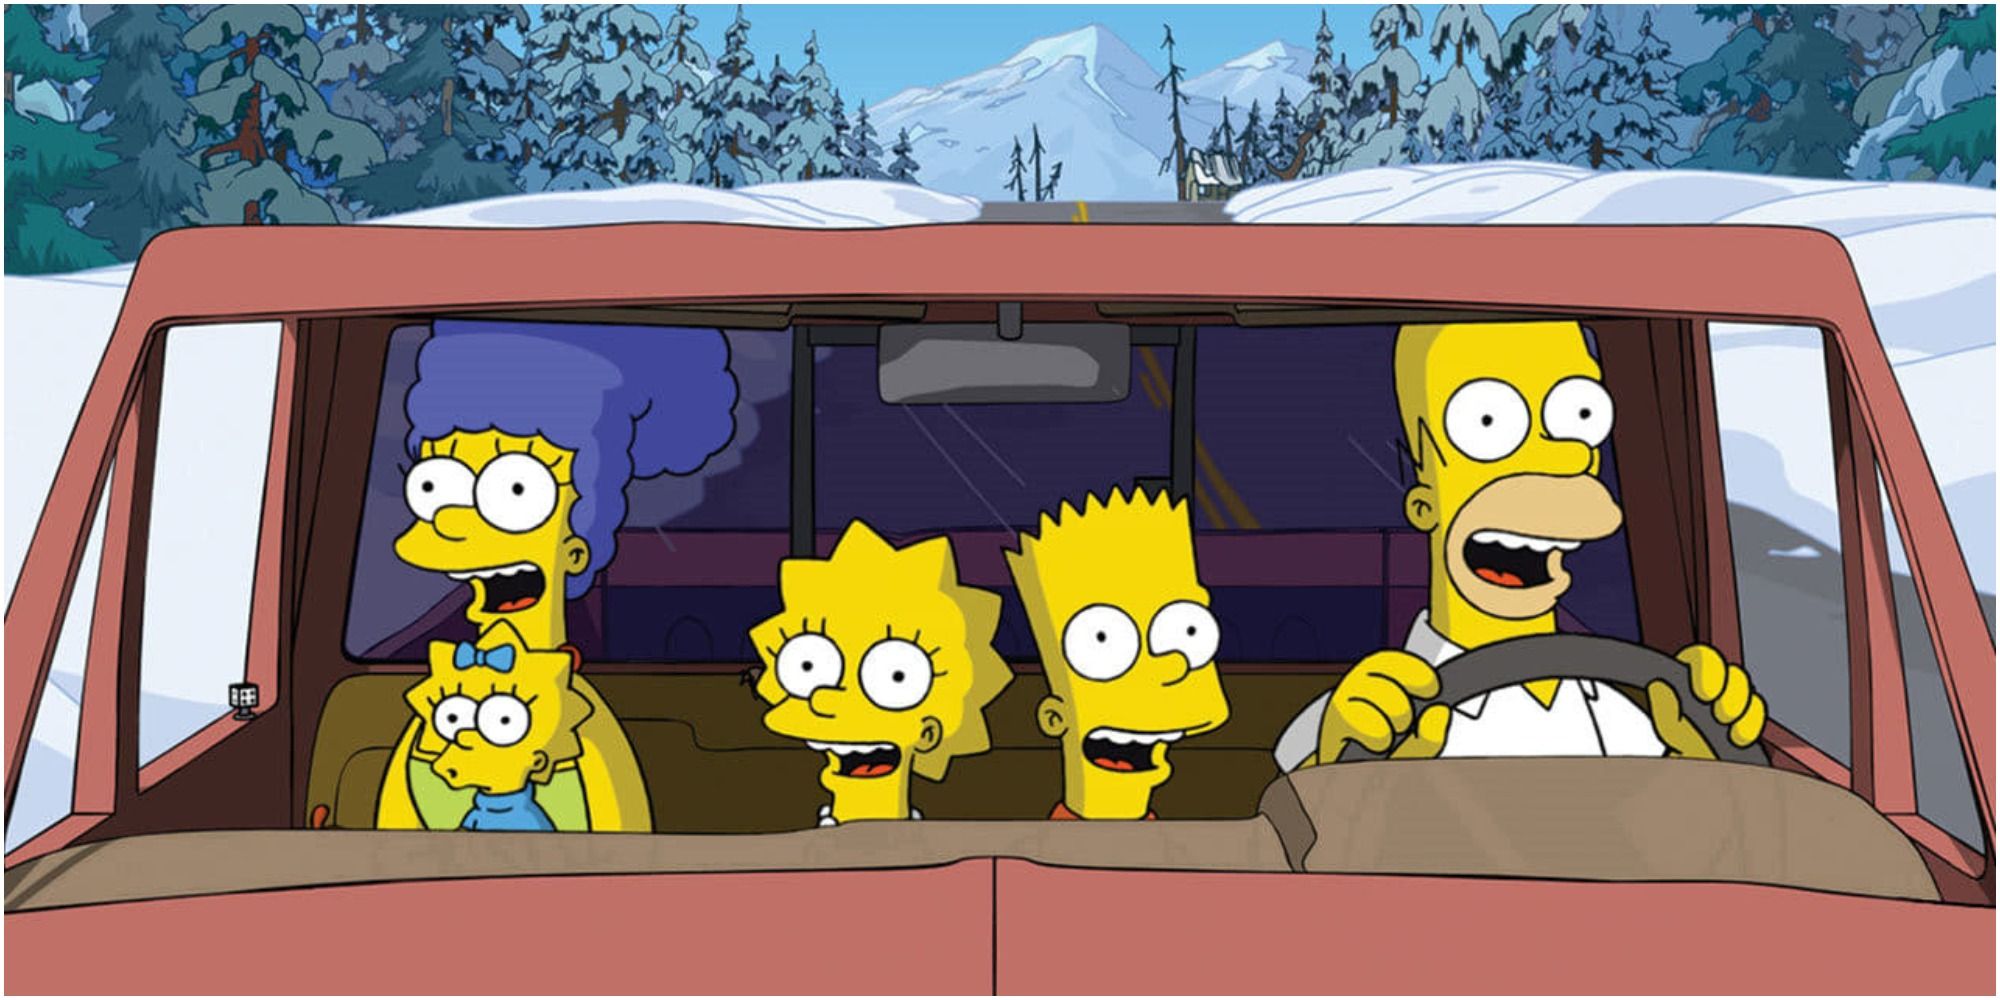 The Simpsons family in their car